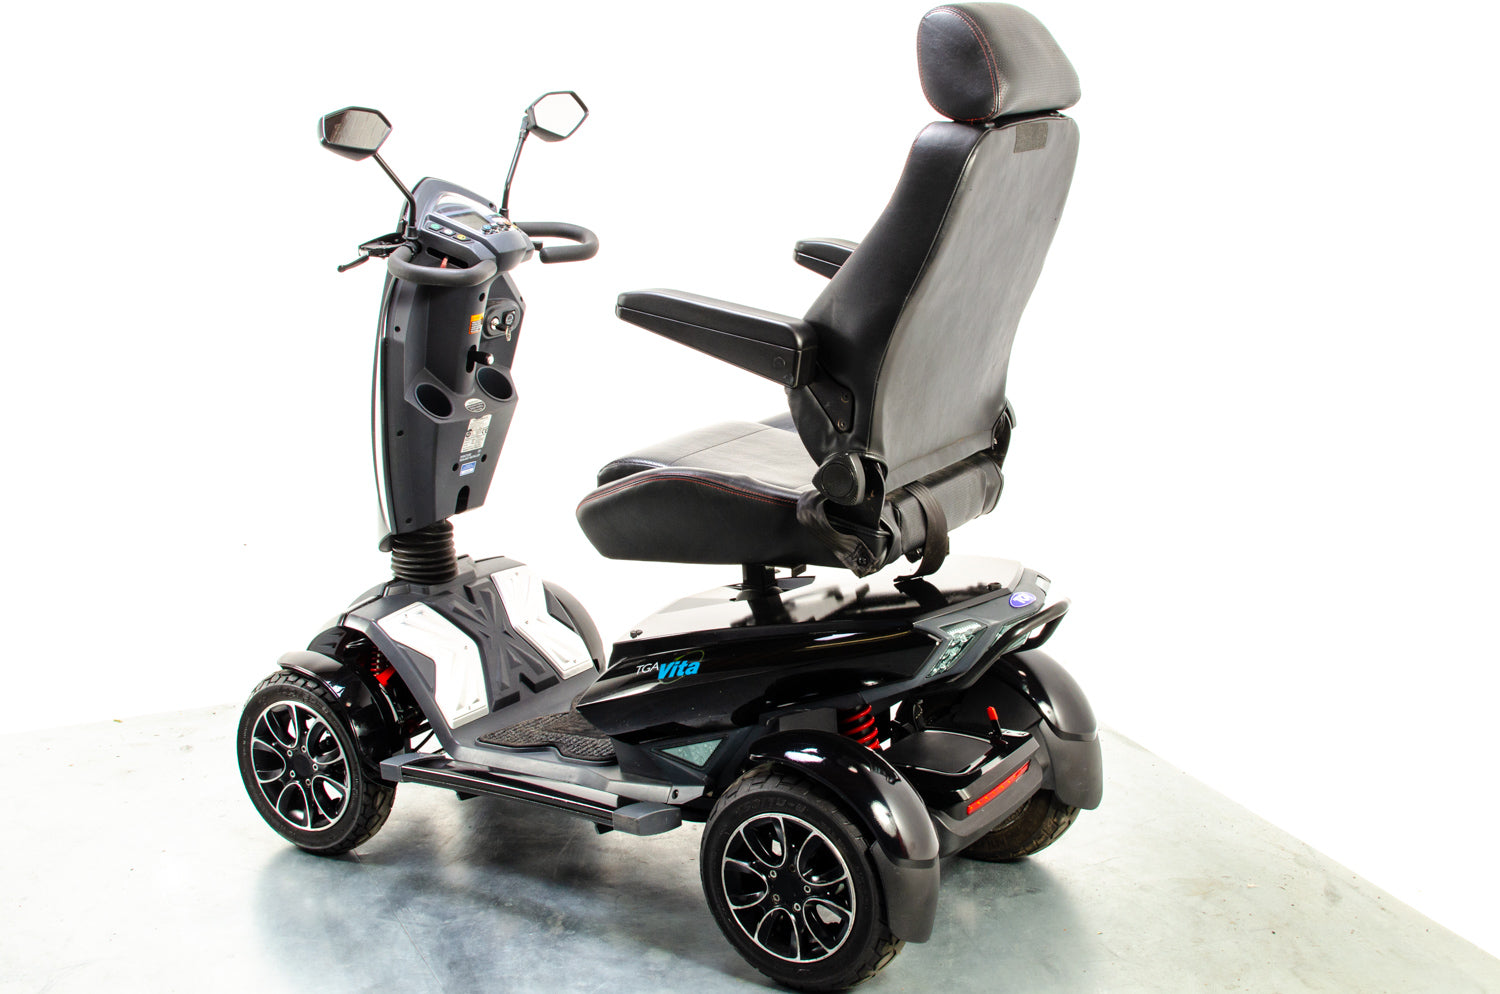 TGA Vita Sport Used Mobility Scooter 8mph All-Terrain Large Road Legal Bucket Seat